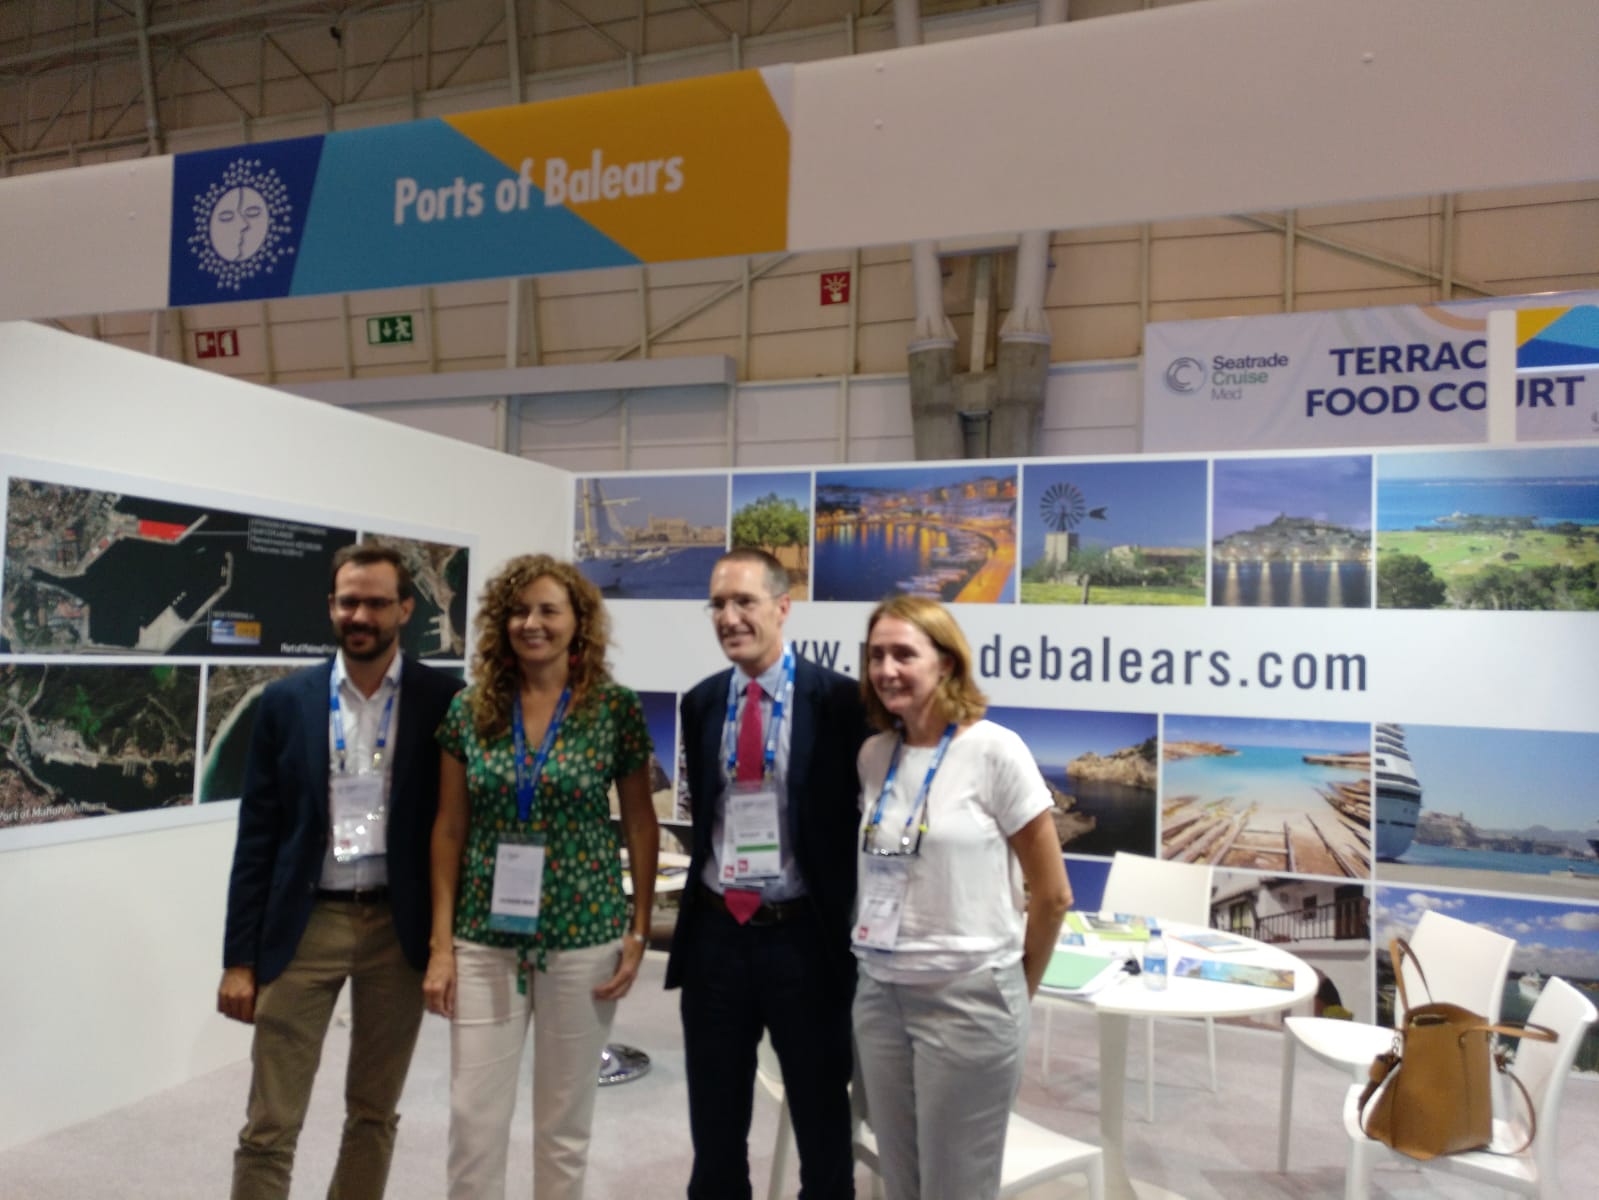 Joan Gual, the President of APB, defends the specialist handling of cruise tourism at the Seatrade Cruise fair in Lisbon